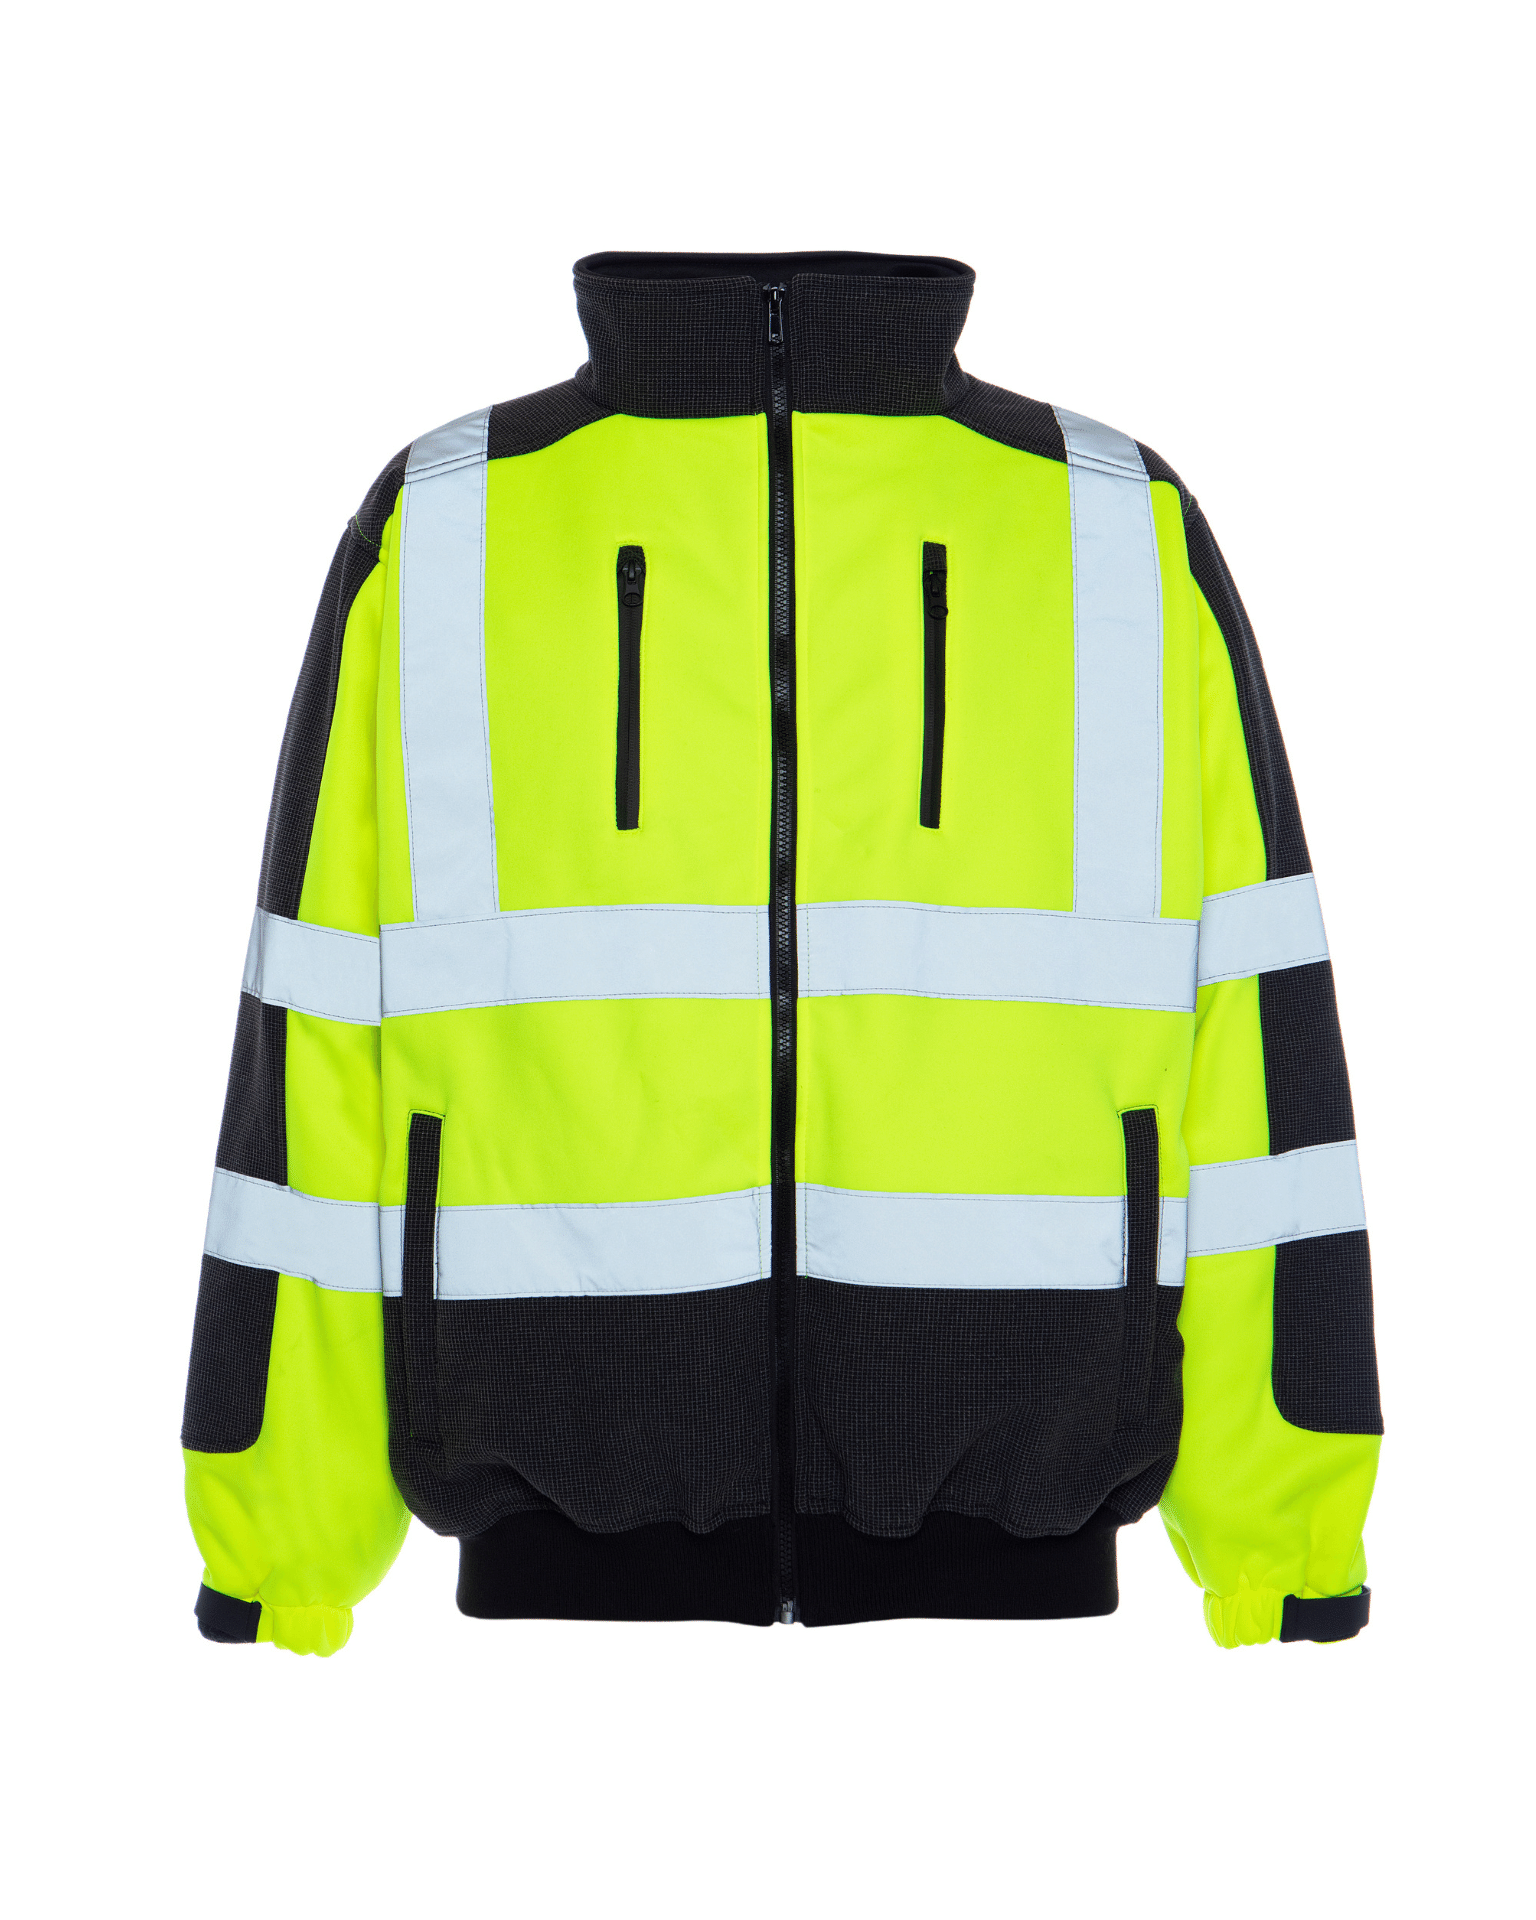 ANSI Class 3 High Visibility sport inspired design TOUGH PRO warm up lining teflon fabric protector soft shell jacket by Utility Pro